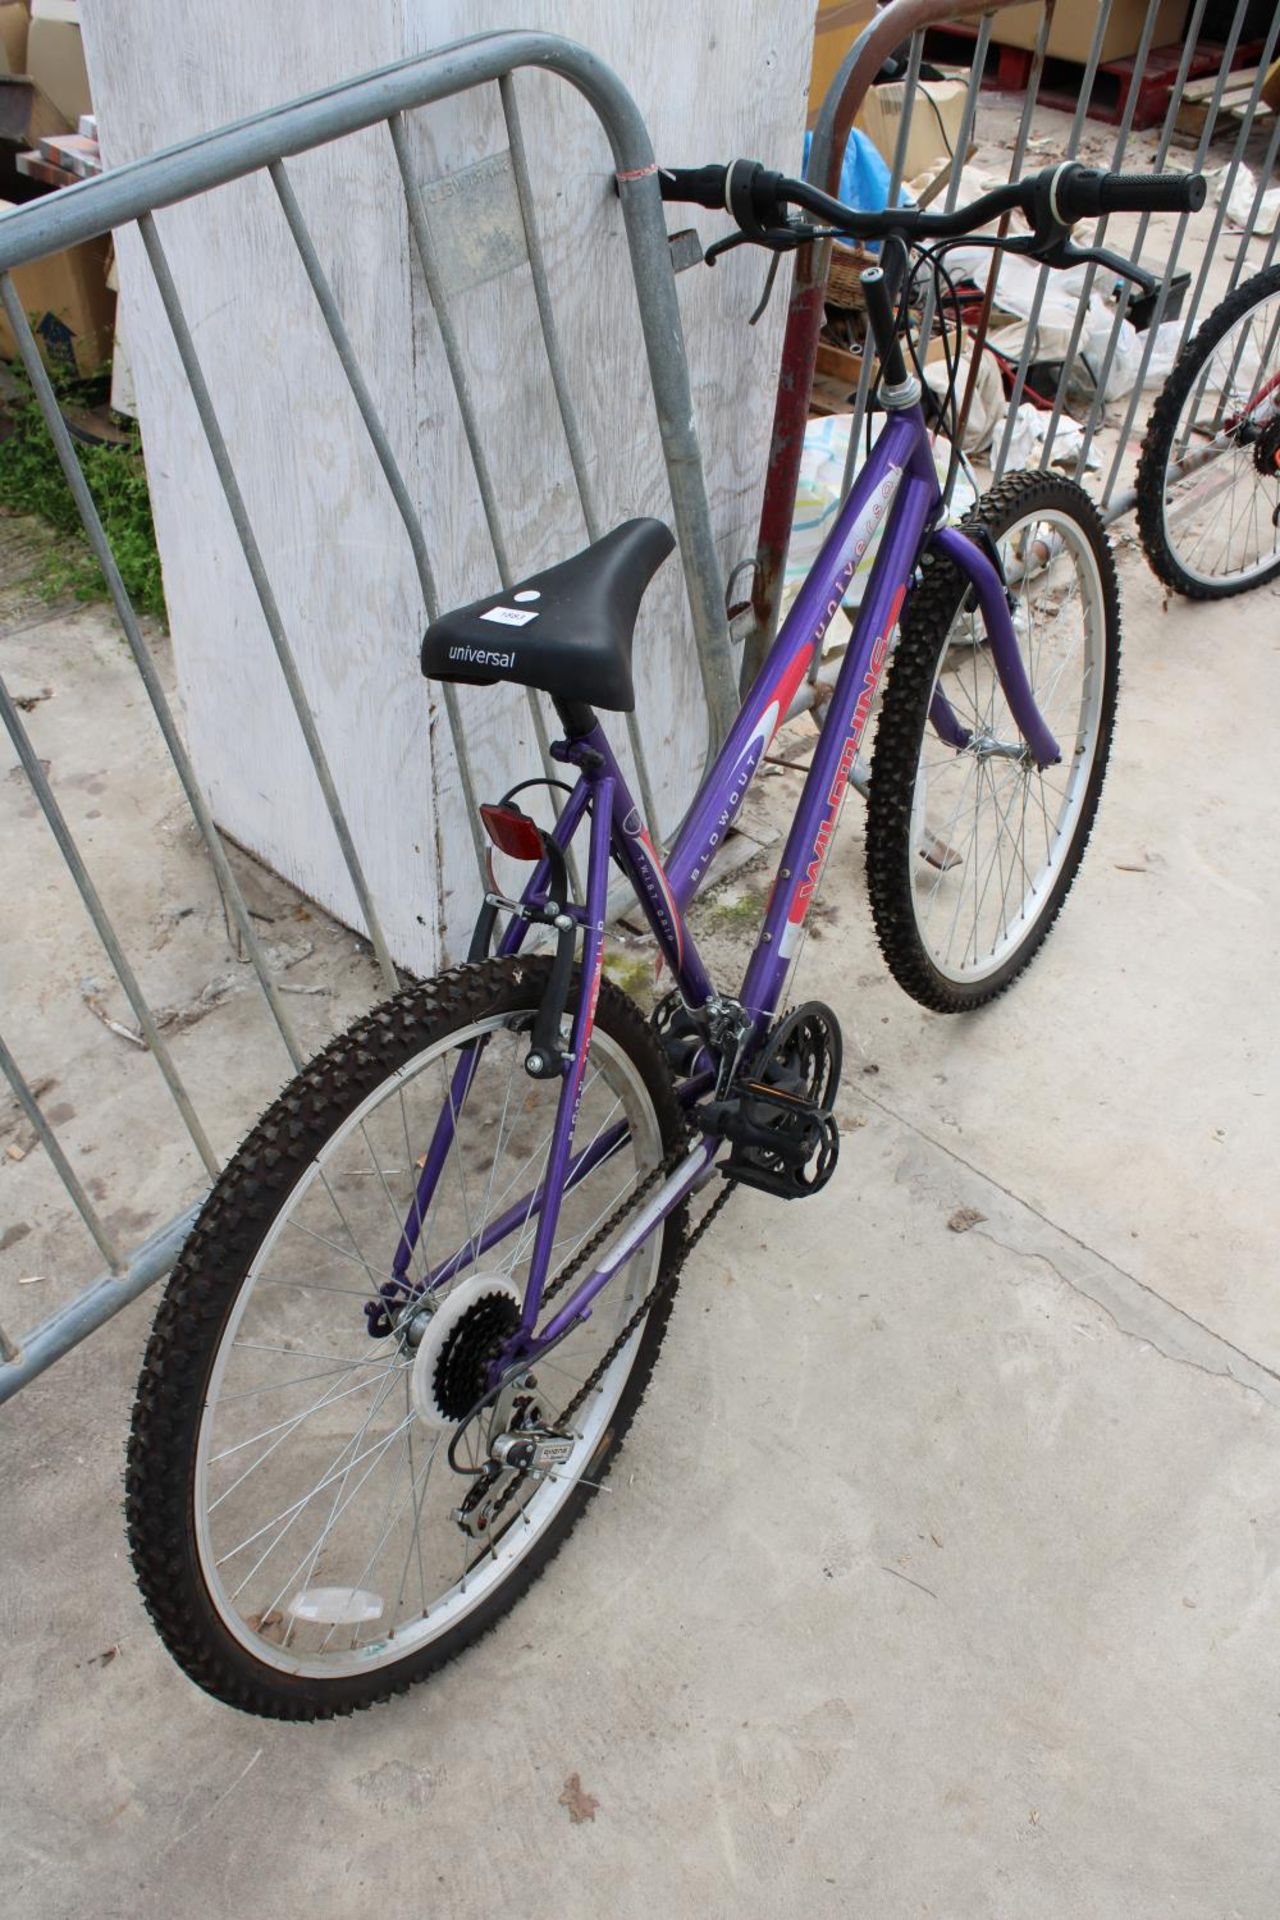 A WILDTHING UNIVERSAL LADIES BIKE WITH 18 SPEED GEAR SYSTEM - Image 2 of 3